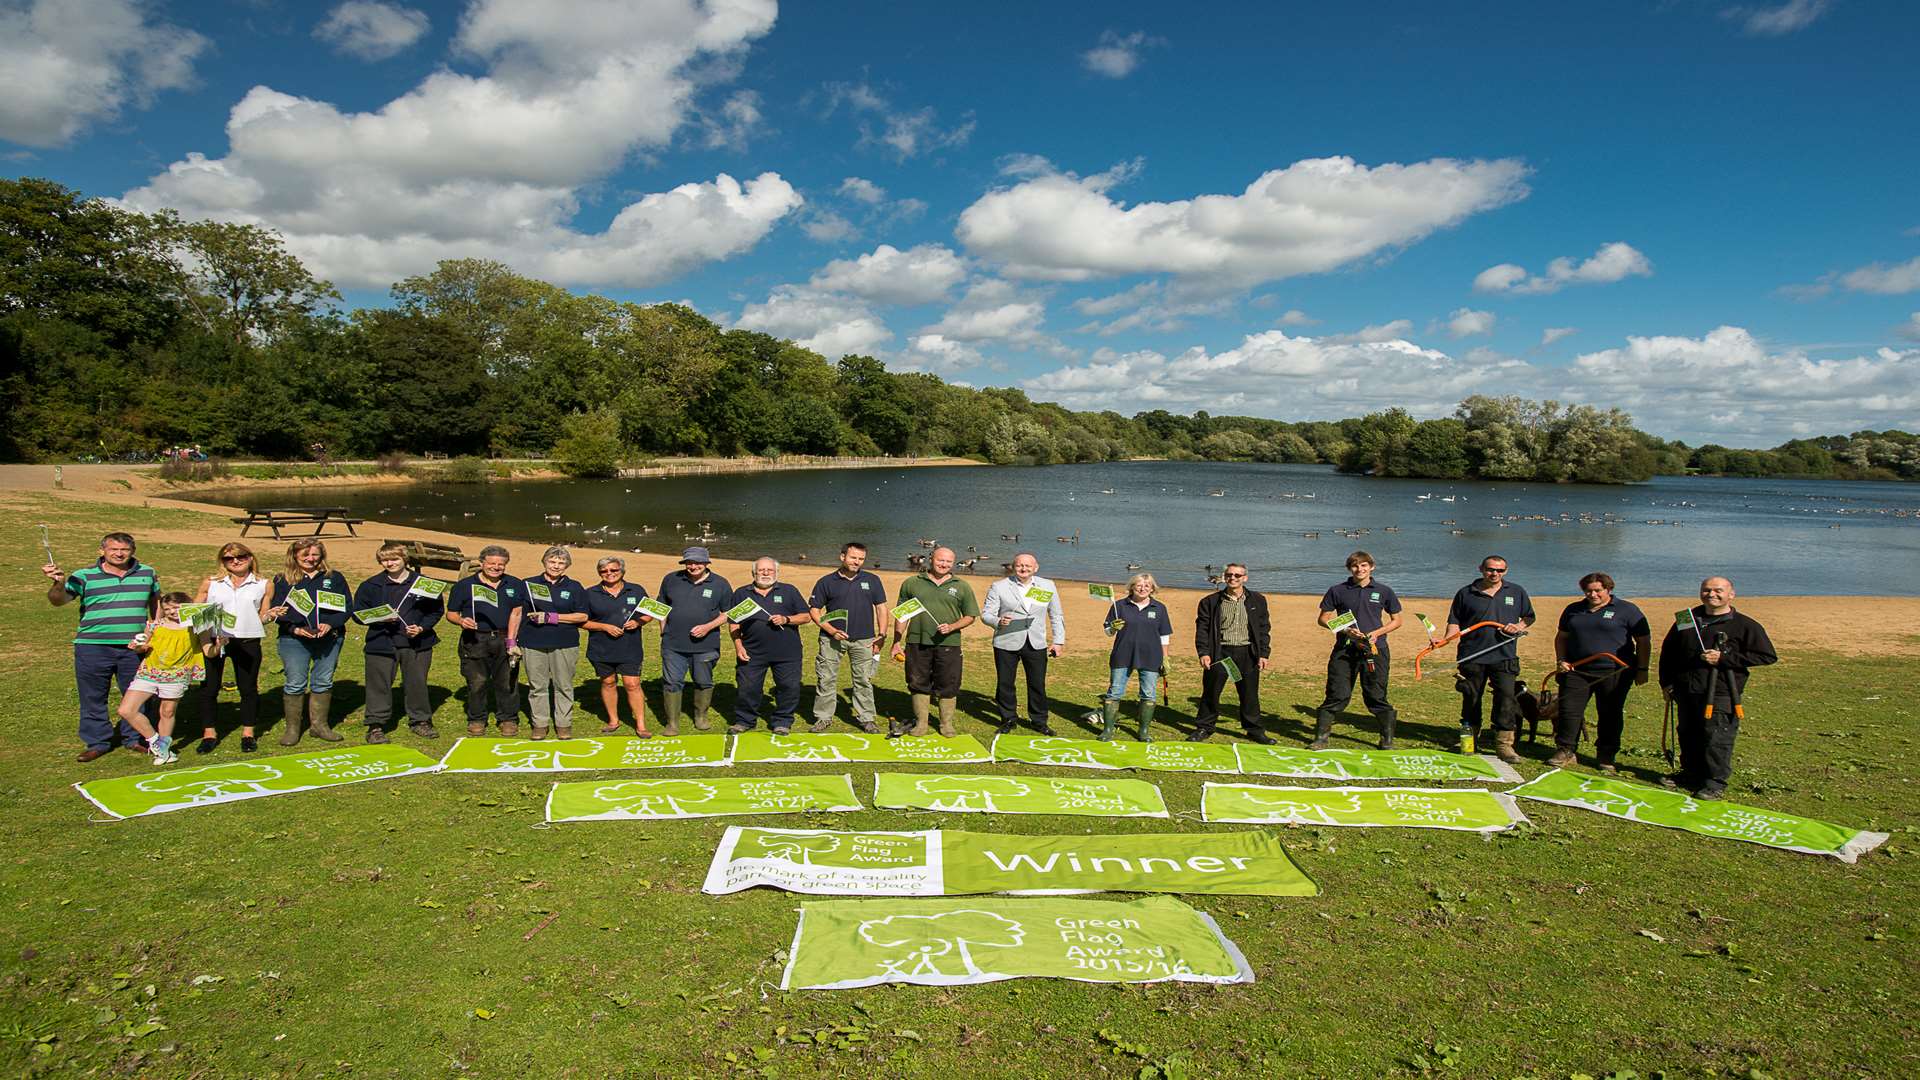 Haysden Country Park has had a Green Flaf for more than ten years